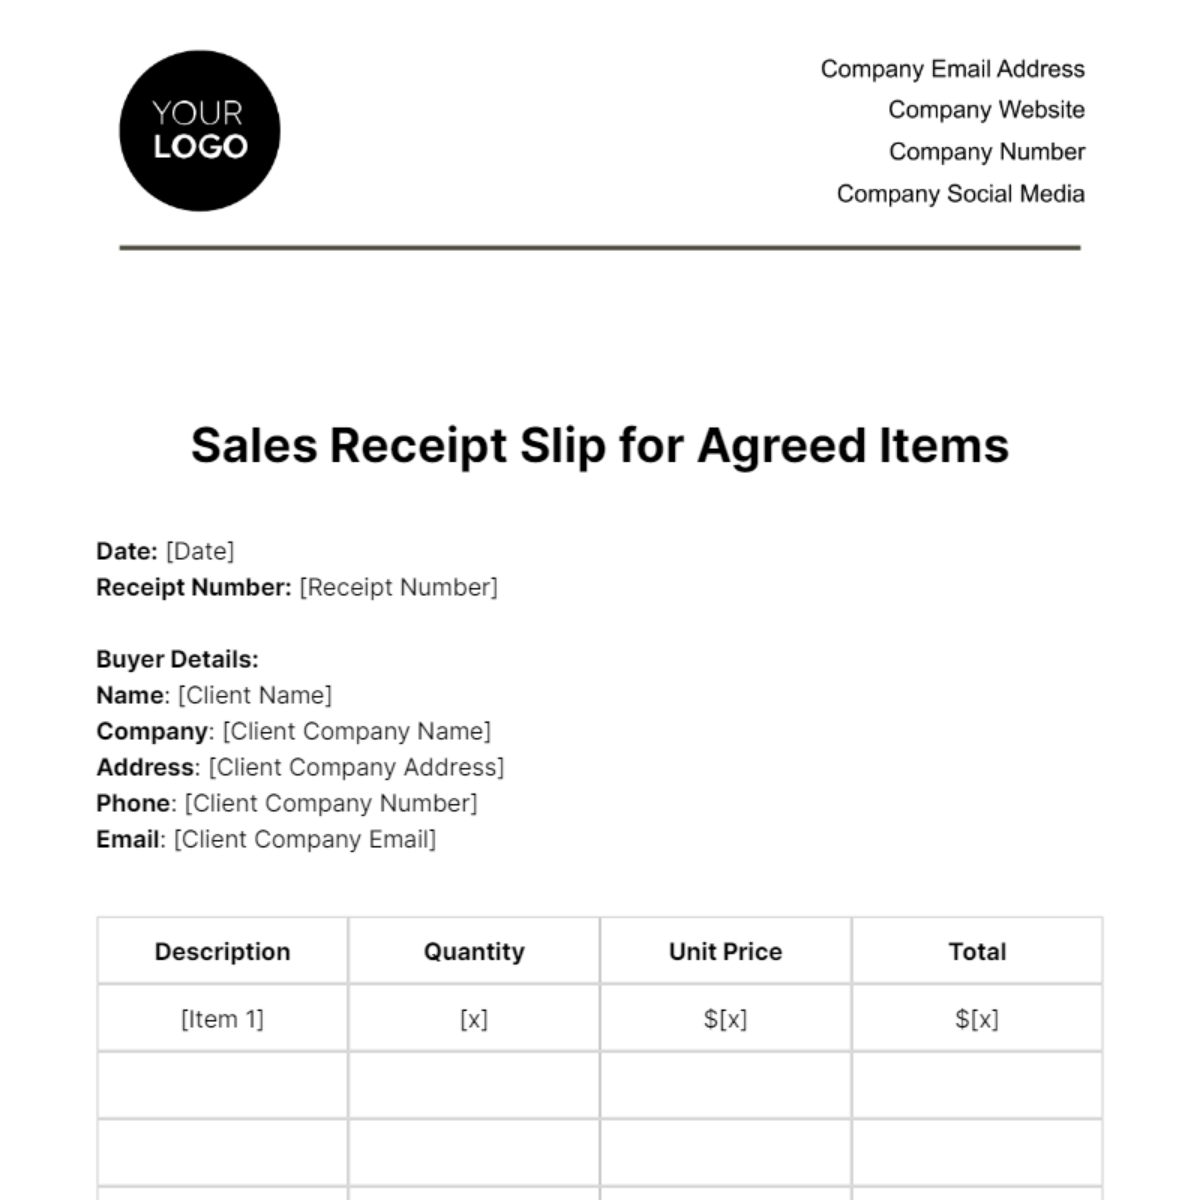 Sales Receipt Slip for Agreed Items Template